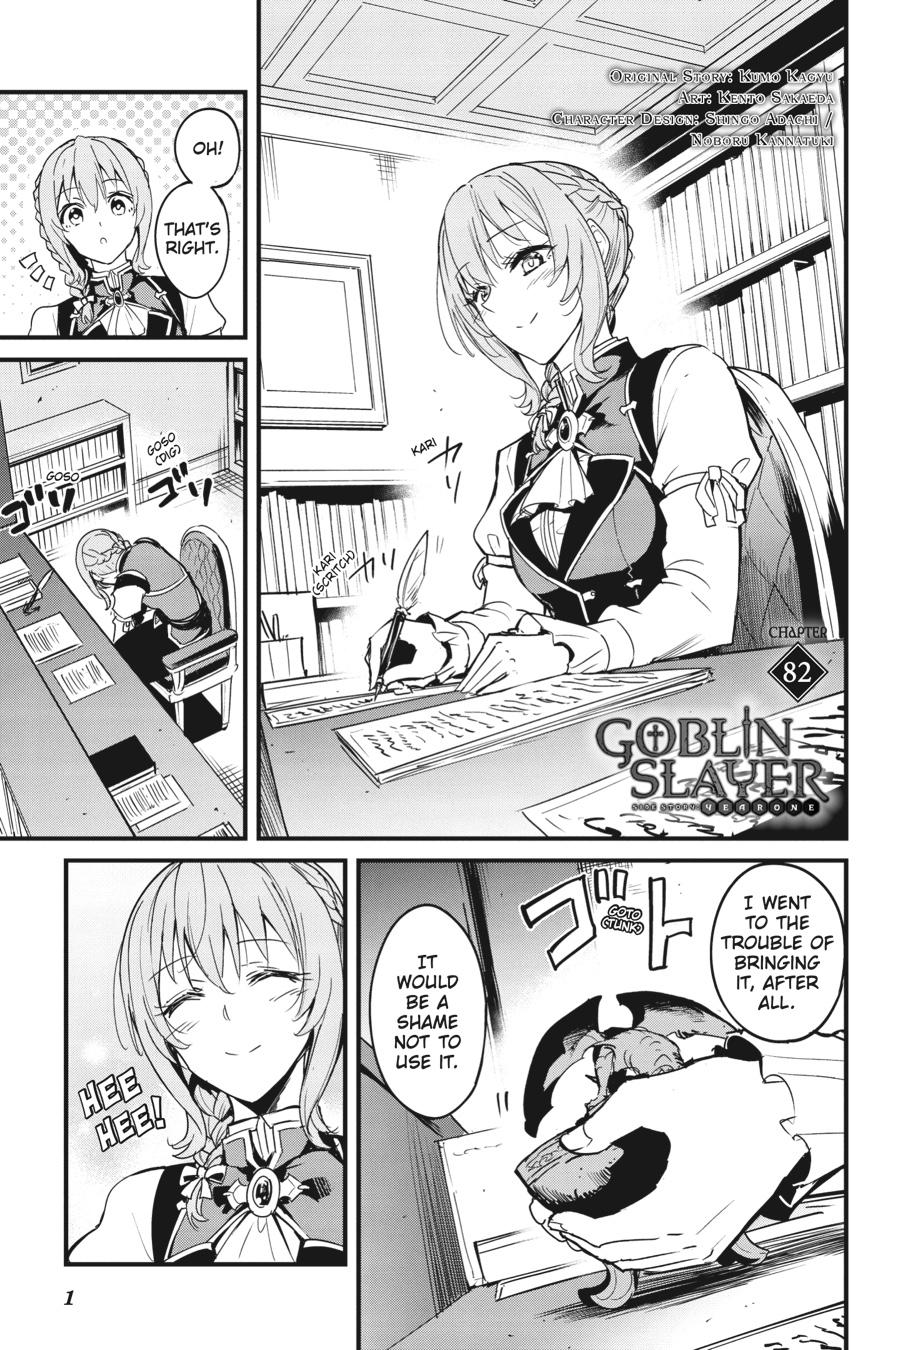 Goblin Slayer: Side Story Year One chapter 82 page 3